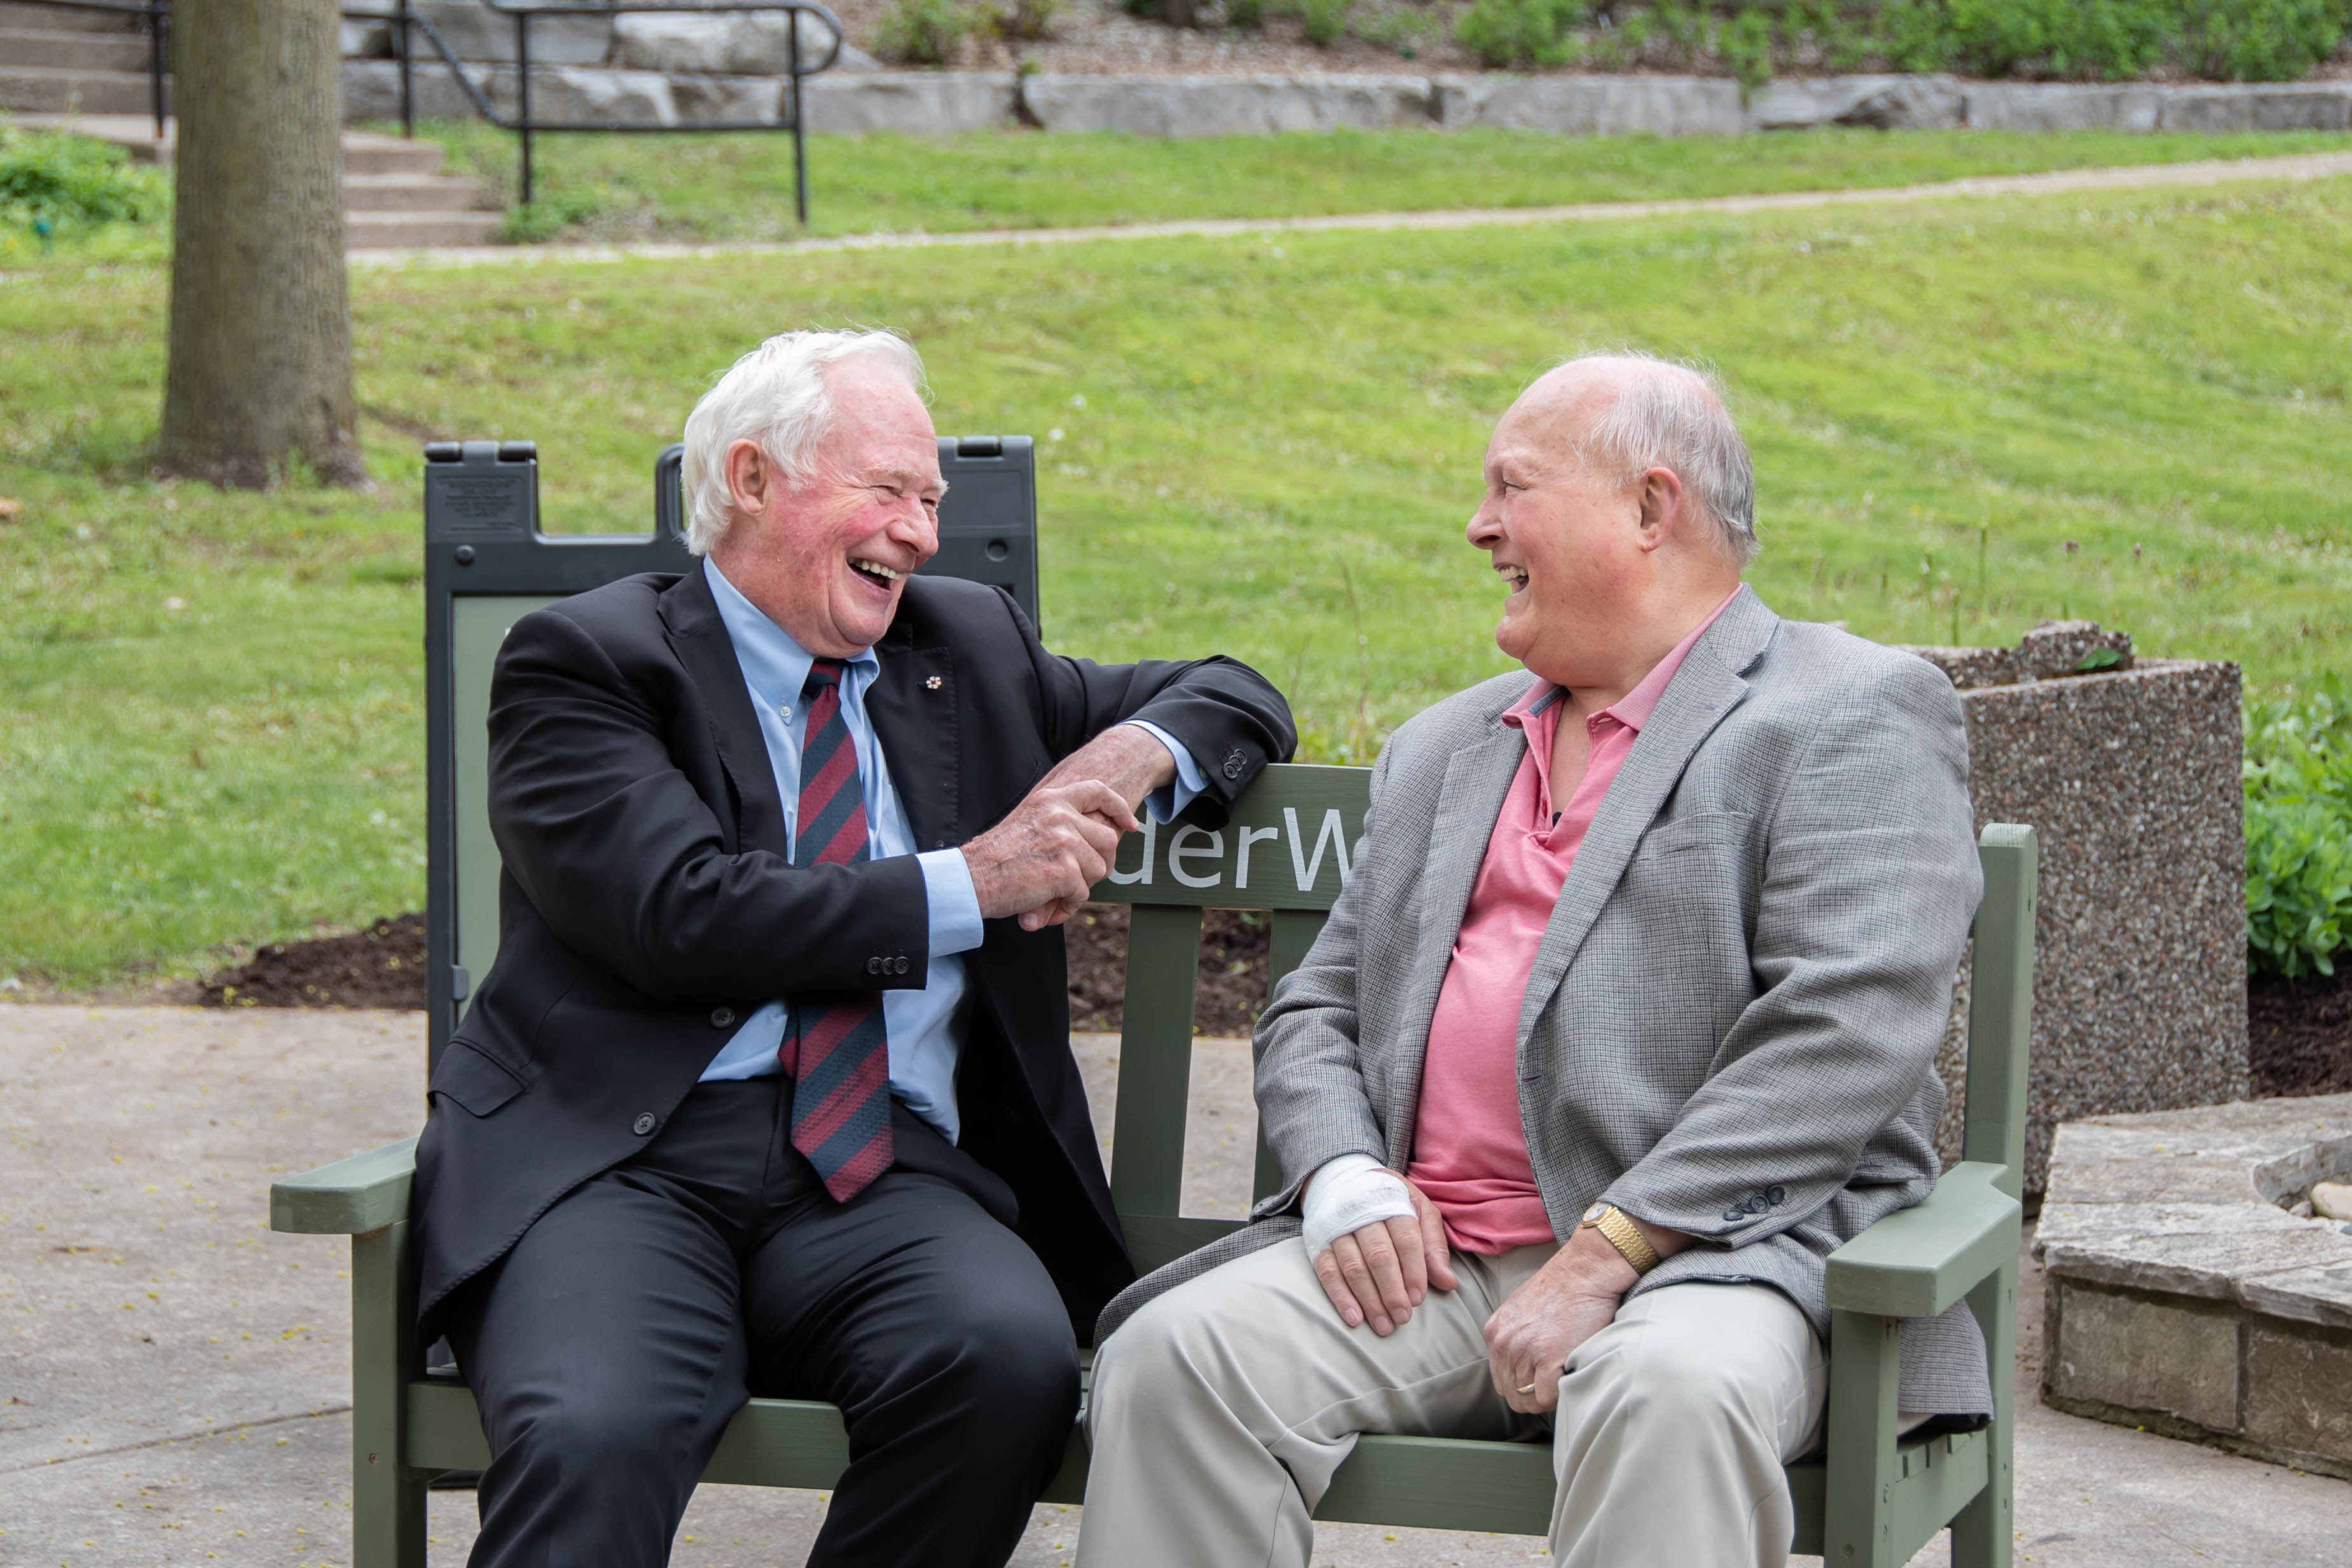 The Right Honourable David Johnston, former Governor General of Canada, and Ron Schlegel have been close for many years. They share stories and laughter upon the #ElderWisdom bench on a late spring afternoon in Guelph.